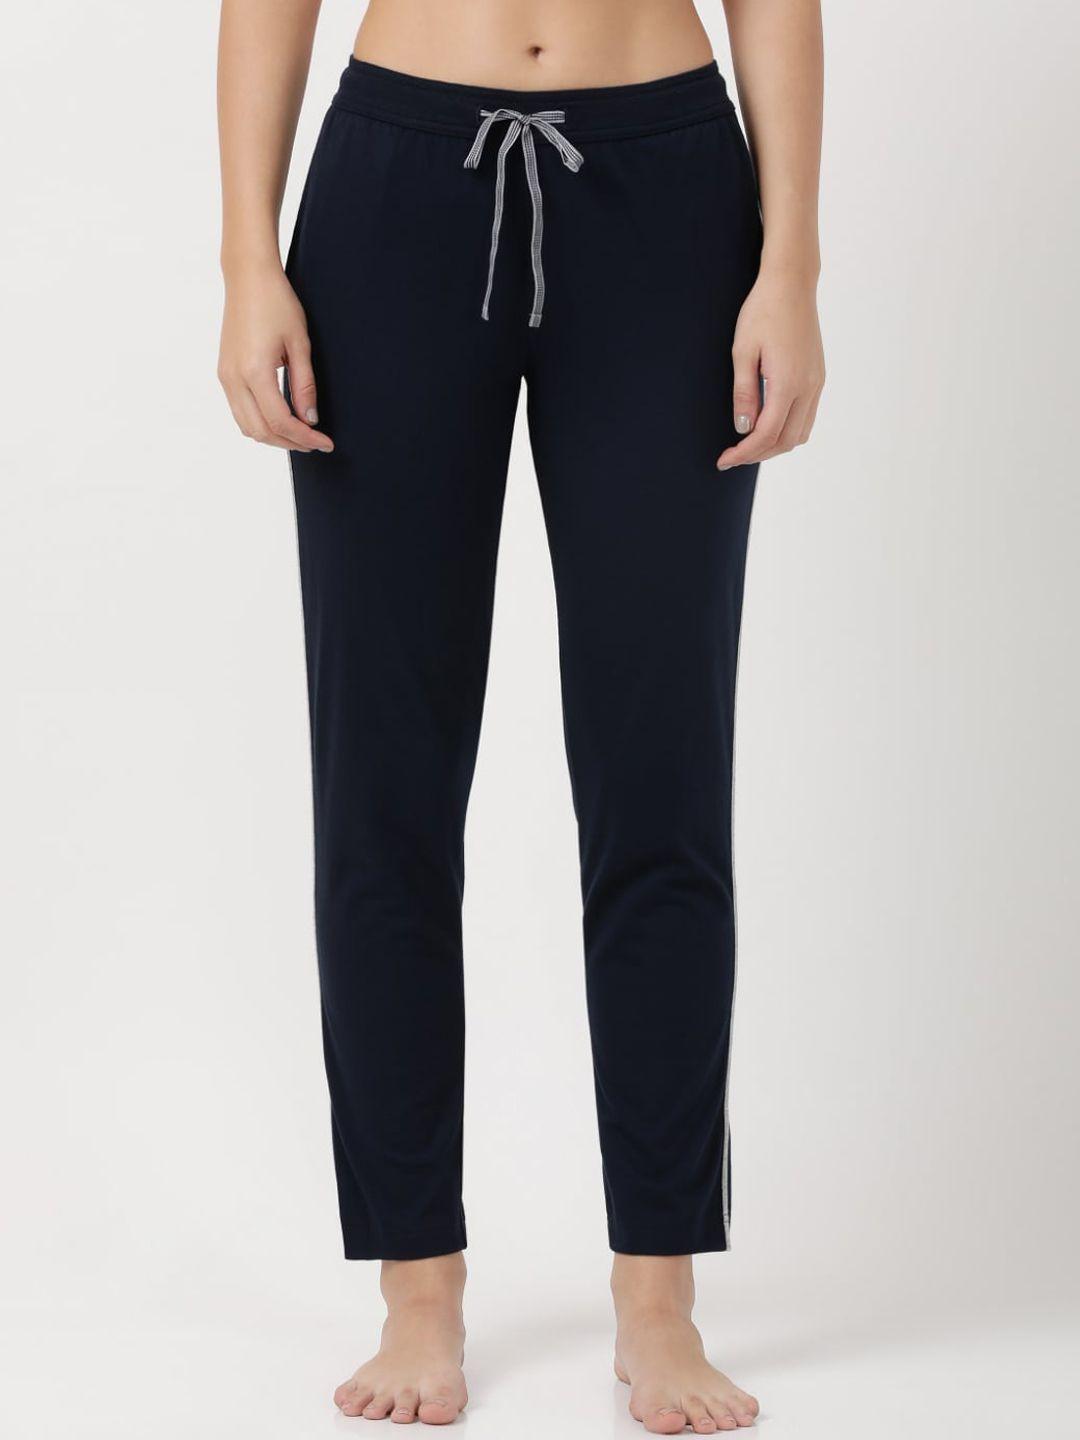 jockey women navy blue solid relaxed-fit lounge pants